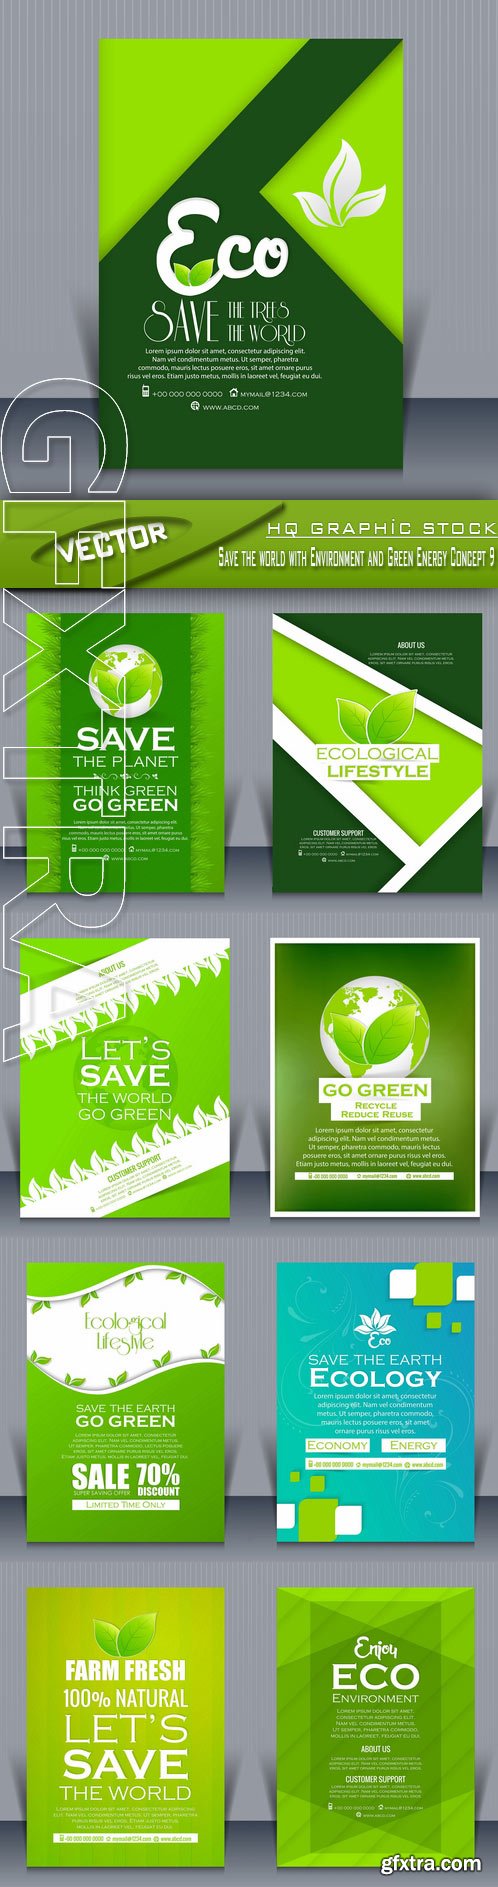 Stock Vector - Save the world with Environment and Green Energy Concept 9